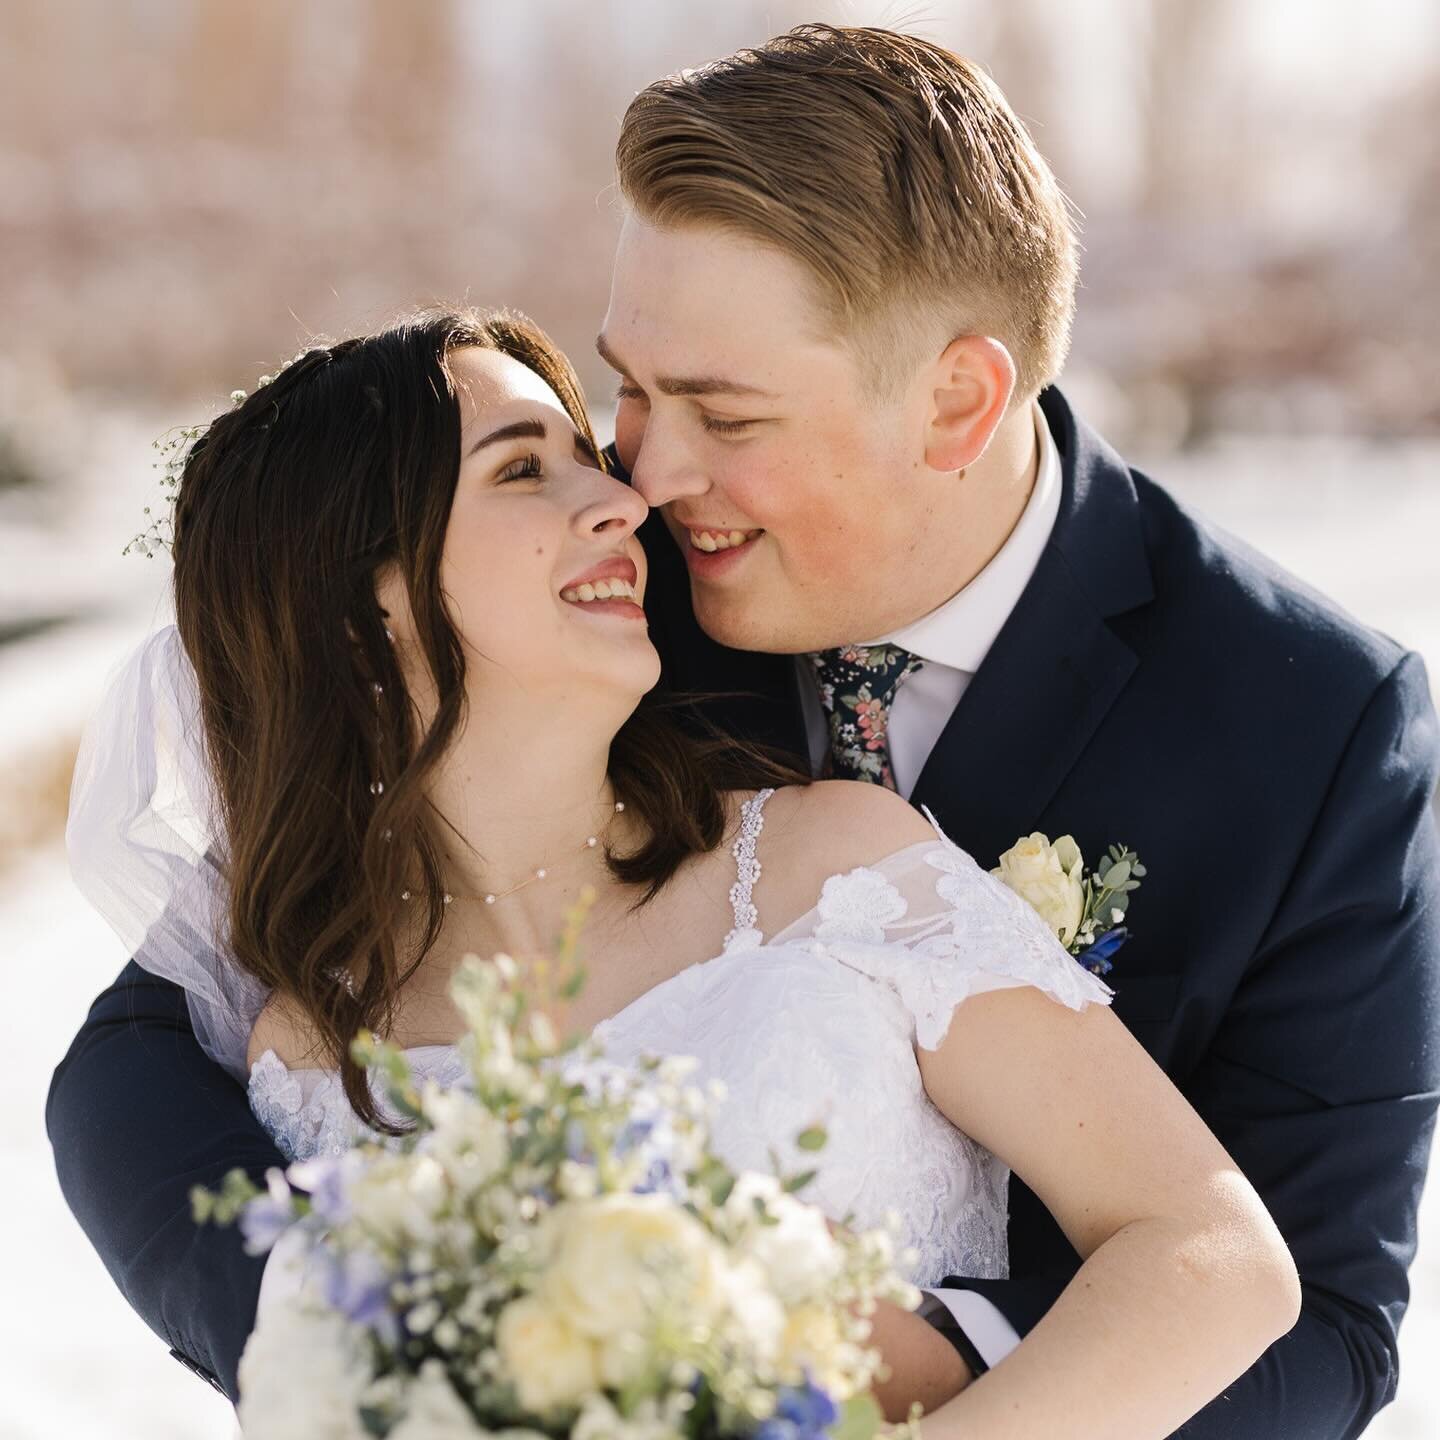 Abby and Bryant were my first wedding of the year! I loved all their wedding decor. And for their send off, it snowed which looked so magical! &bull;
&bull;
&bull;
&bull;
&bull;
&bull;
 #bridals #utahbridals #jamietervortphotography #utahbride #brida